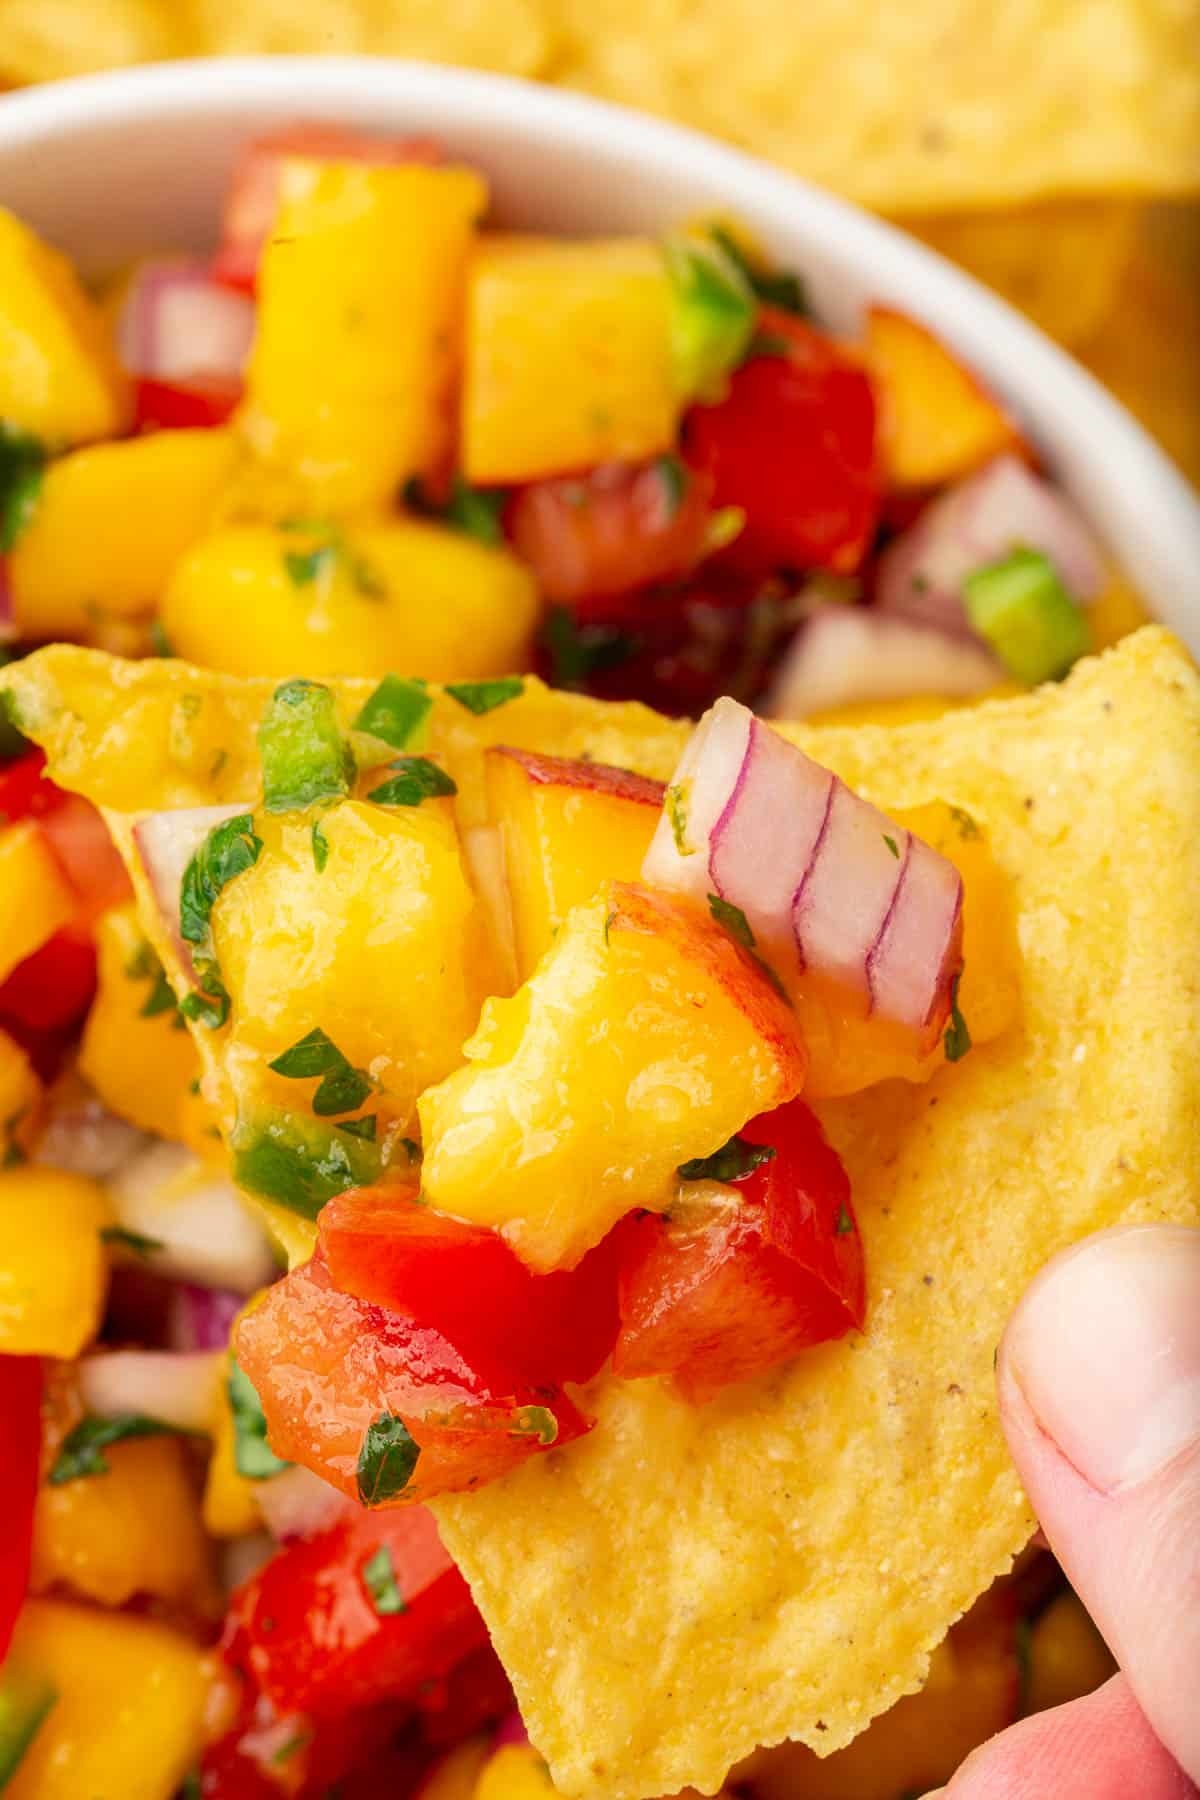 A closeup of a hand holding a tortilla chip topped with peach mango salsa over a bowl of more fruit salsa.